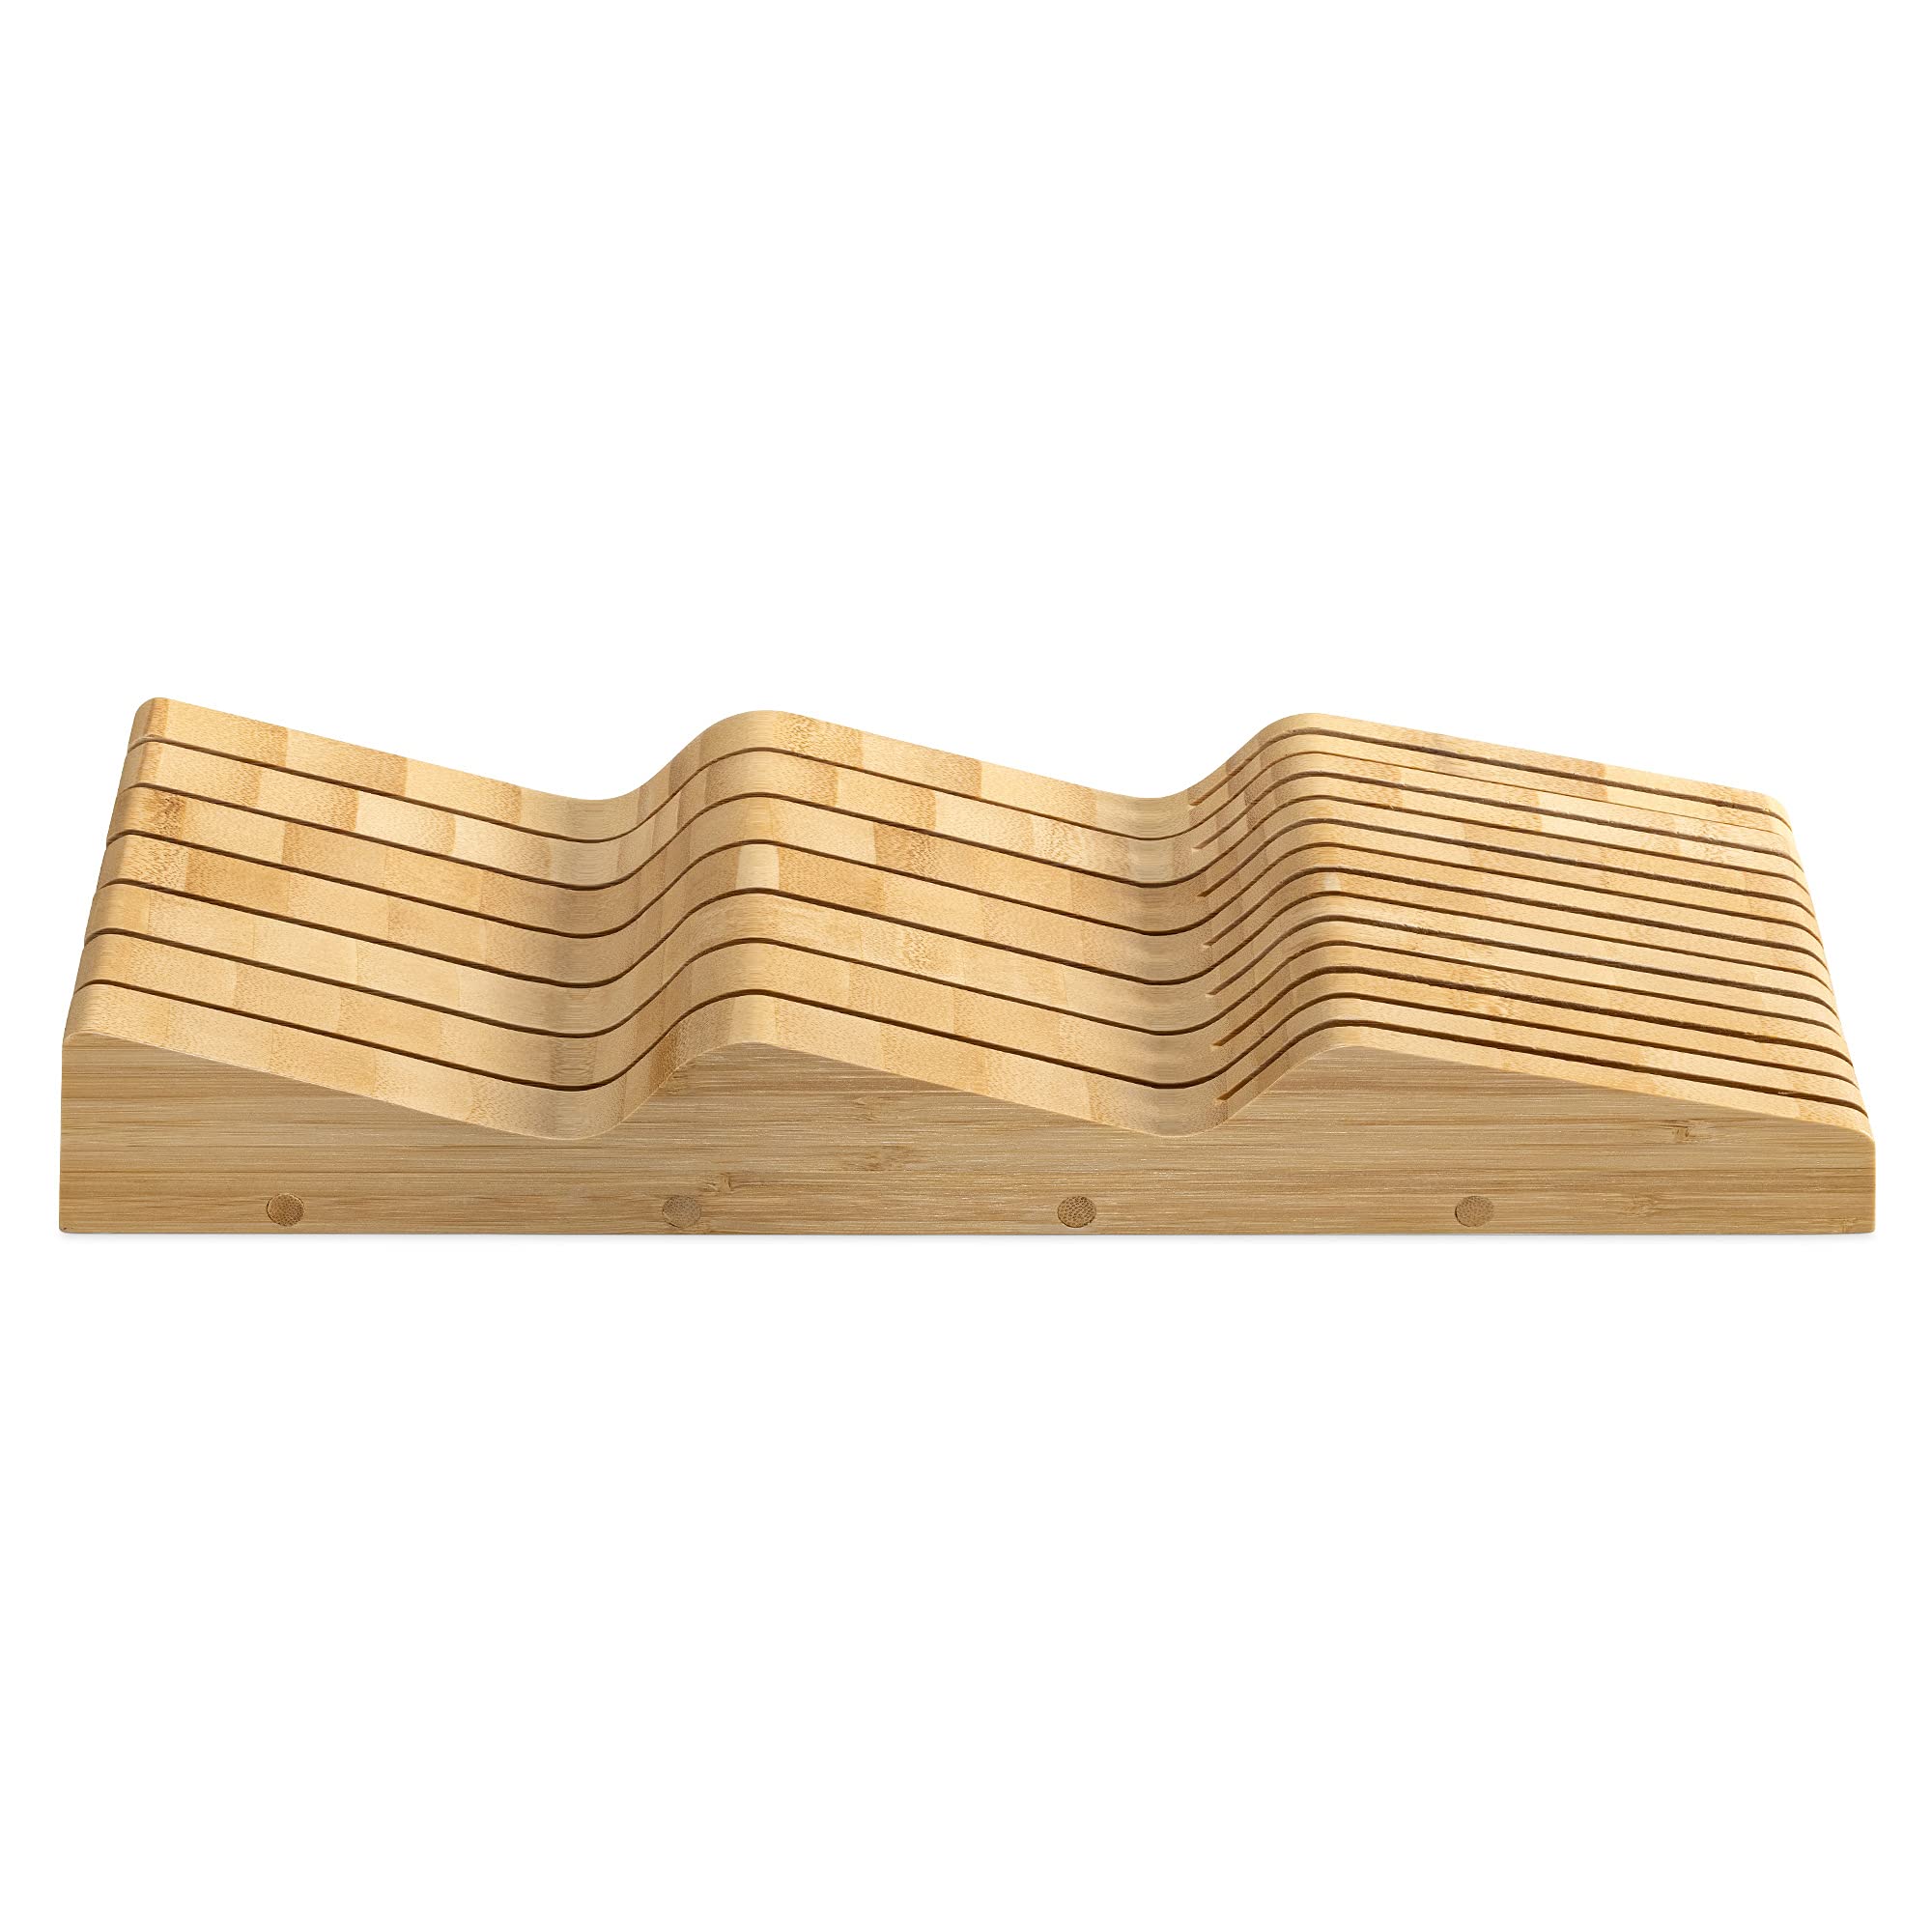 Navaris In-Drawer Knife Block - Organizer with Slots for 13 Knives - Bamboo Storage Insert for Kitchen Drawers 5 15/16" Wide x 15 3/4" Deep x 2" High